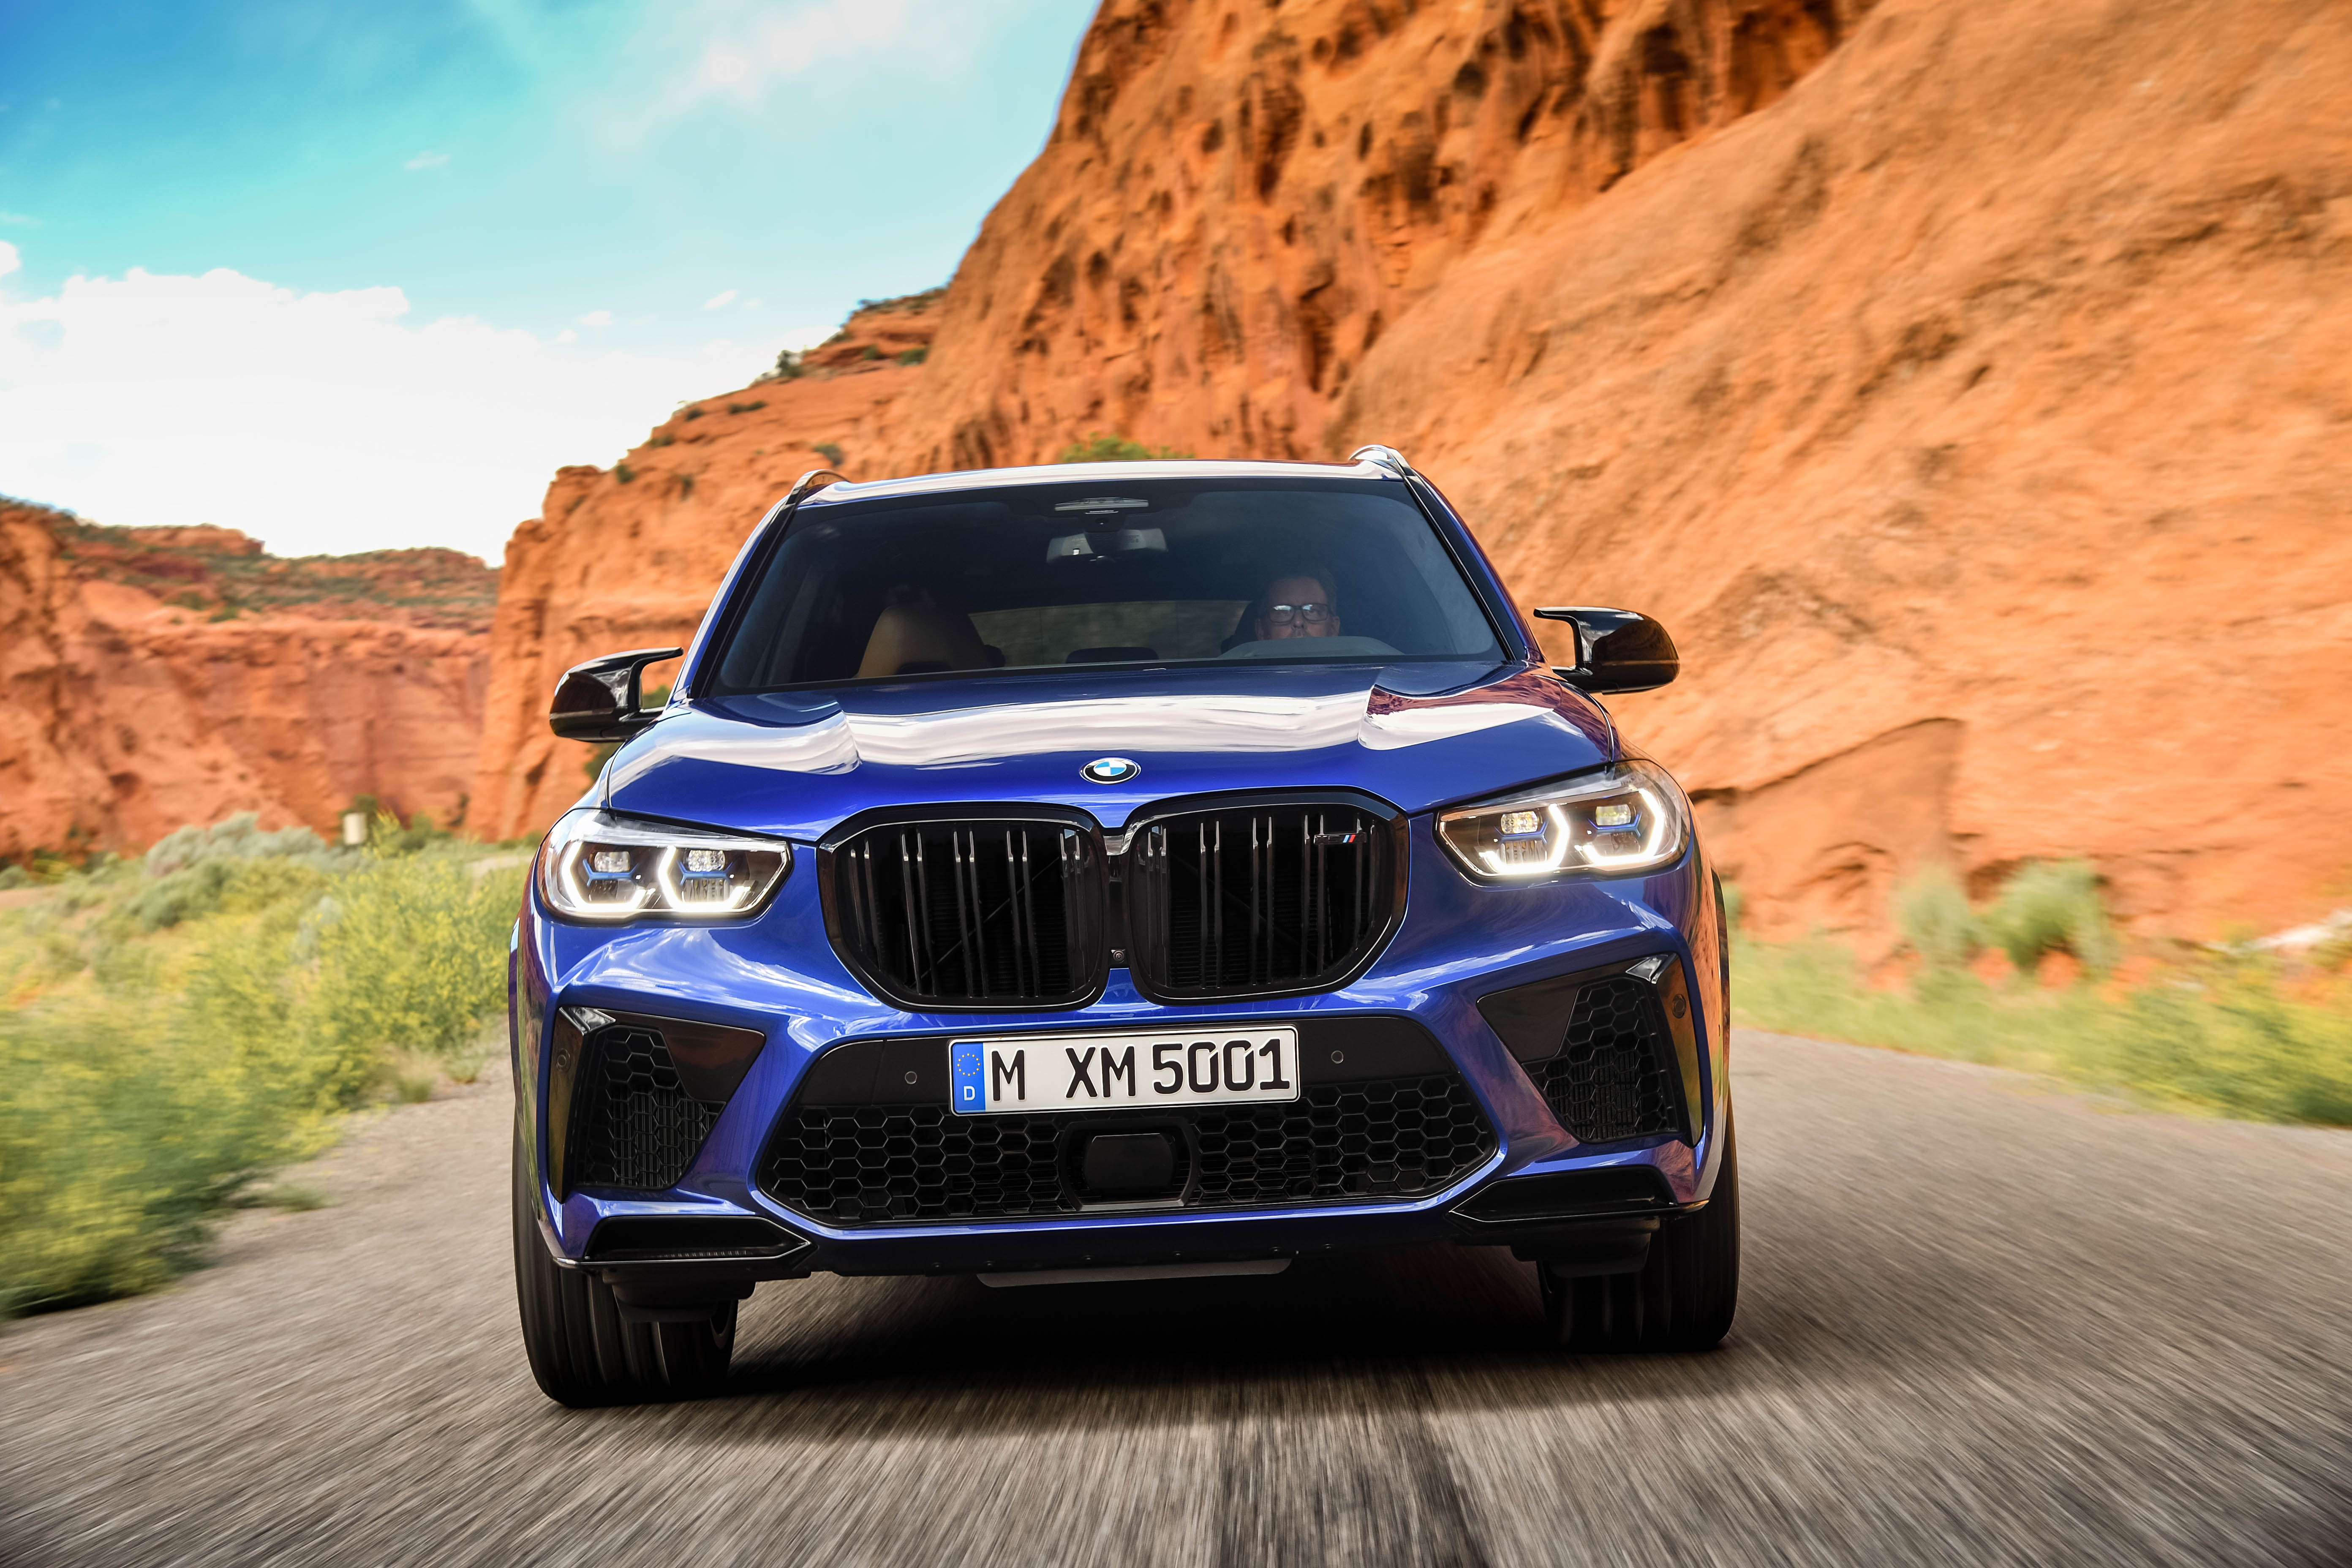 Bmw x5 40i. БМВ х5 2022. BMW x5m 2019. BMW x5m новый. BMW x5 m Competition.